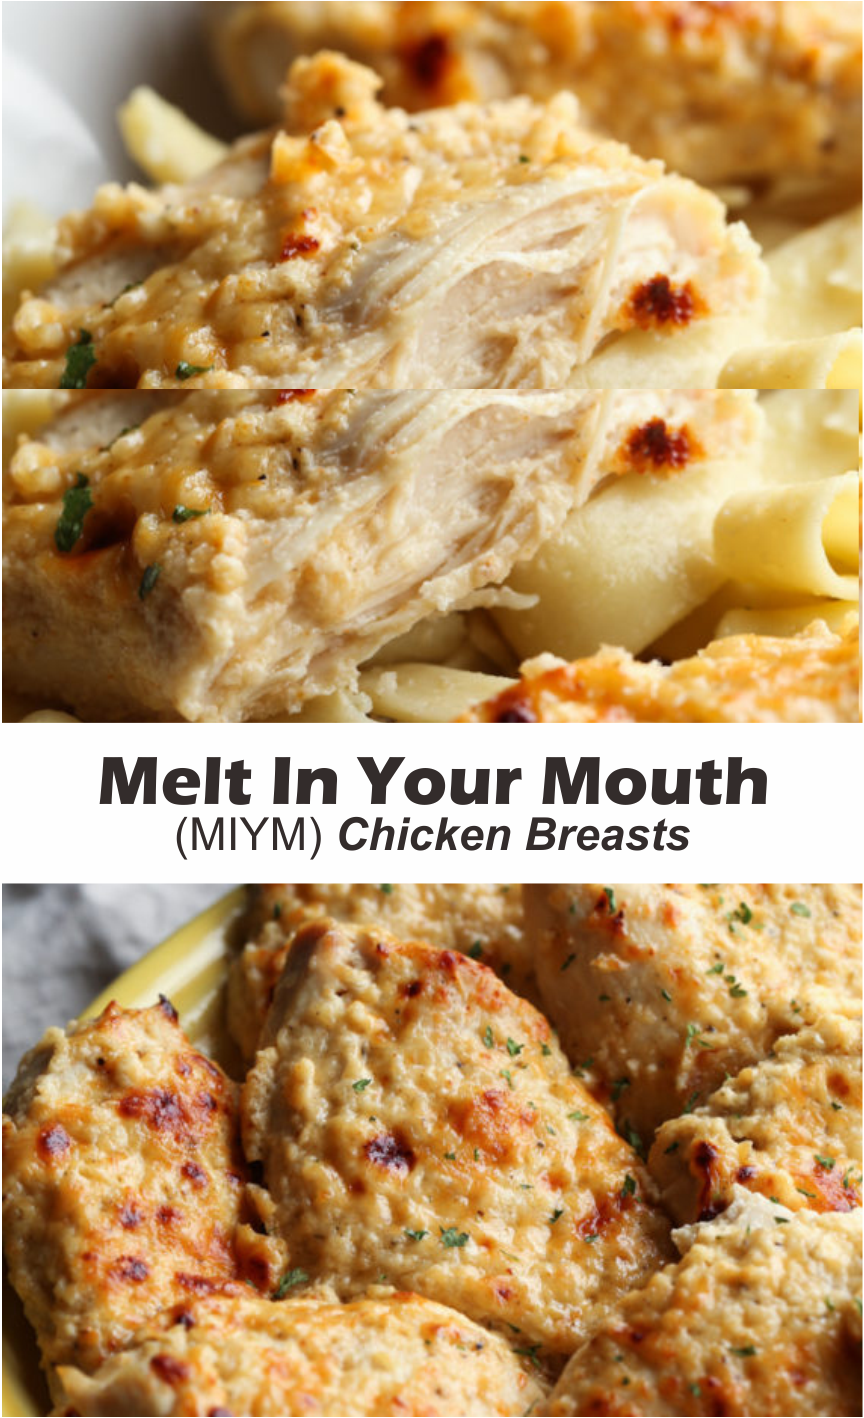 Melt In Your Mouth (MIYM) Chicken Breasts | Amzing Food